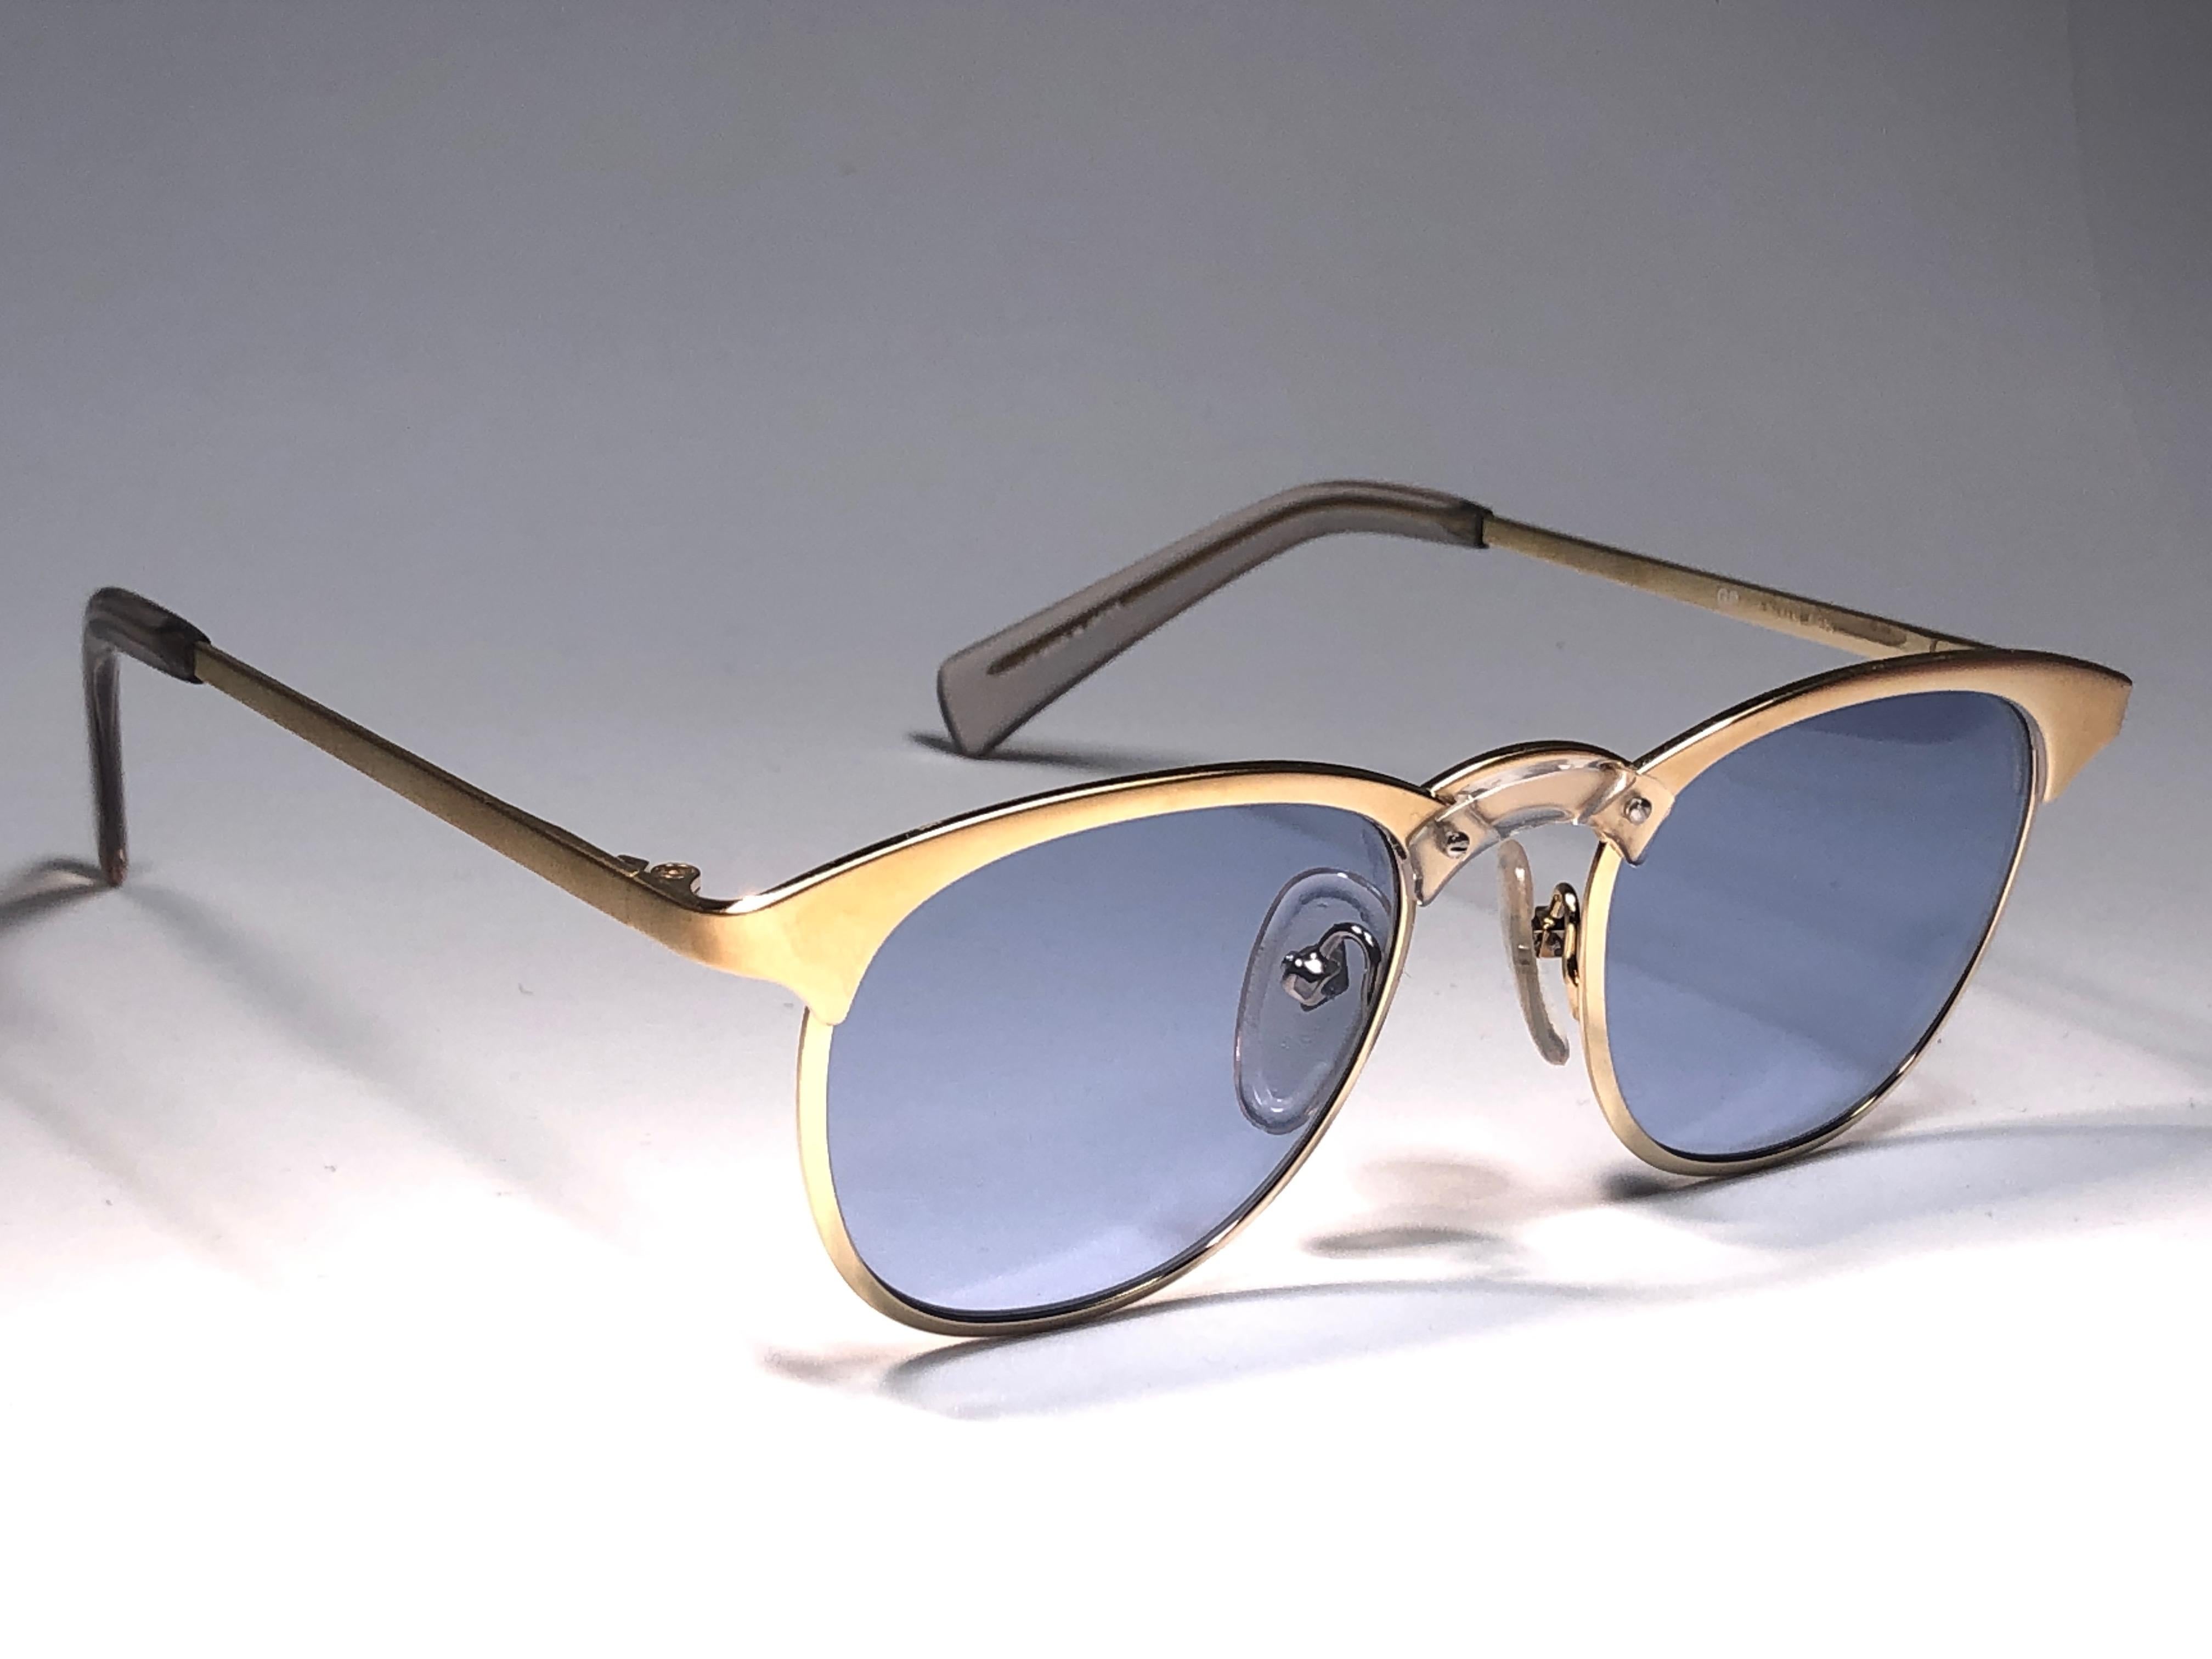 Gray New Jean Paul Gaultier 57 0175 Oval Gold Sunglasses 1990's Made in Japan 